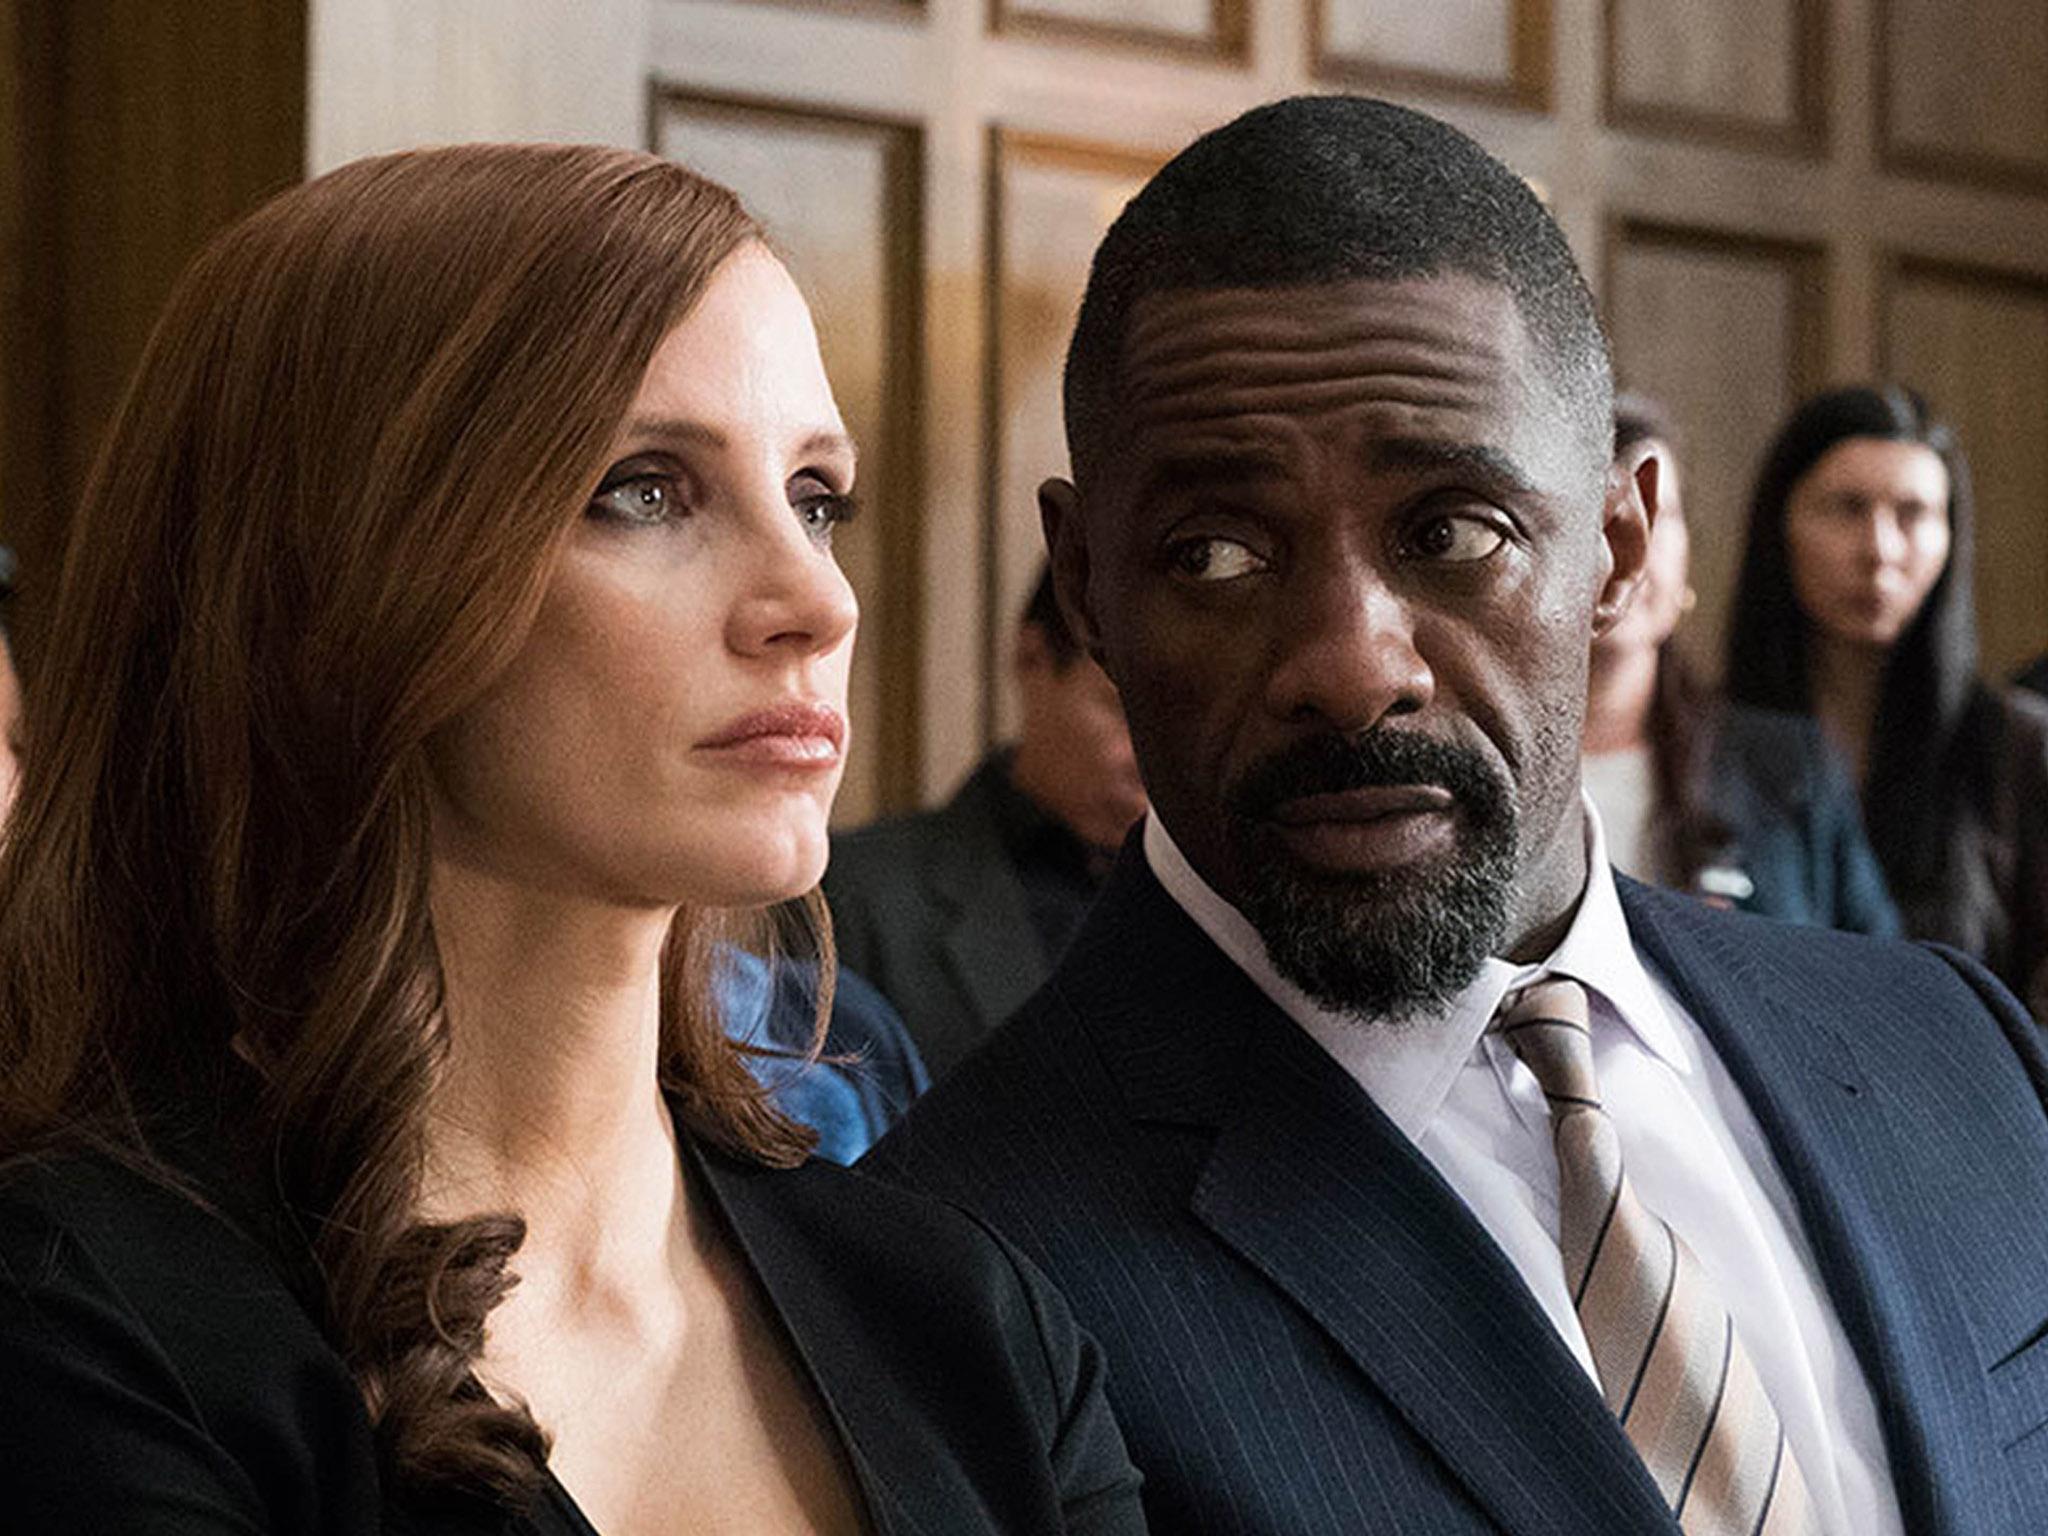 Based on a true story, Molly's Game – the directorial debut of Aaron Sorkin – gives us Jessica Chastain’s second force-of-nature performance in a matter of months